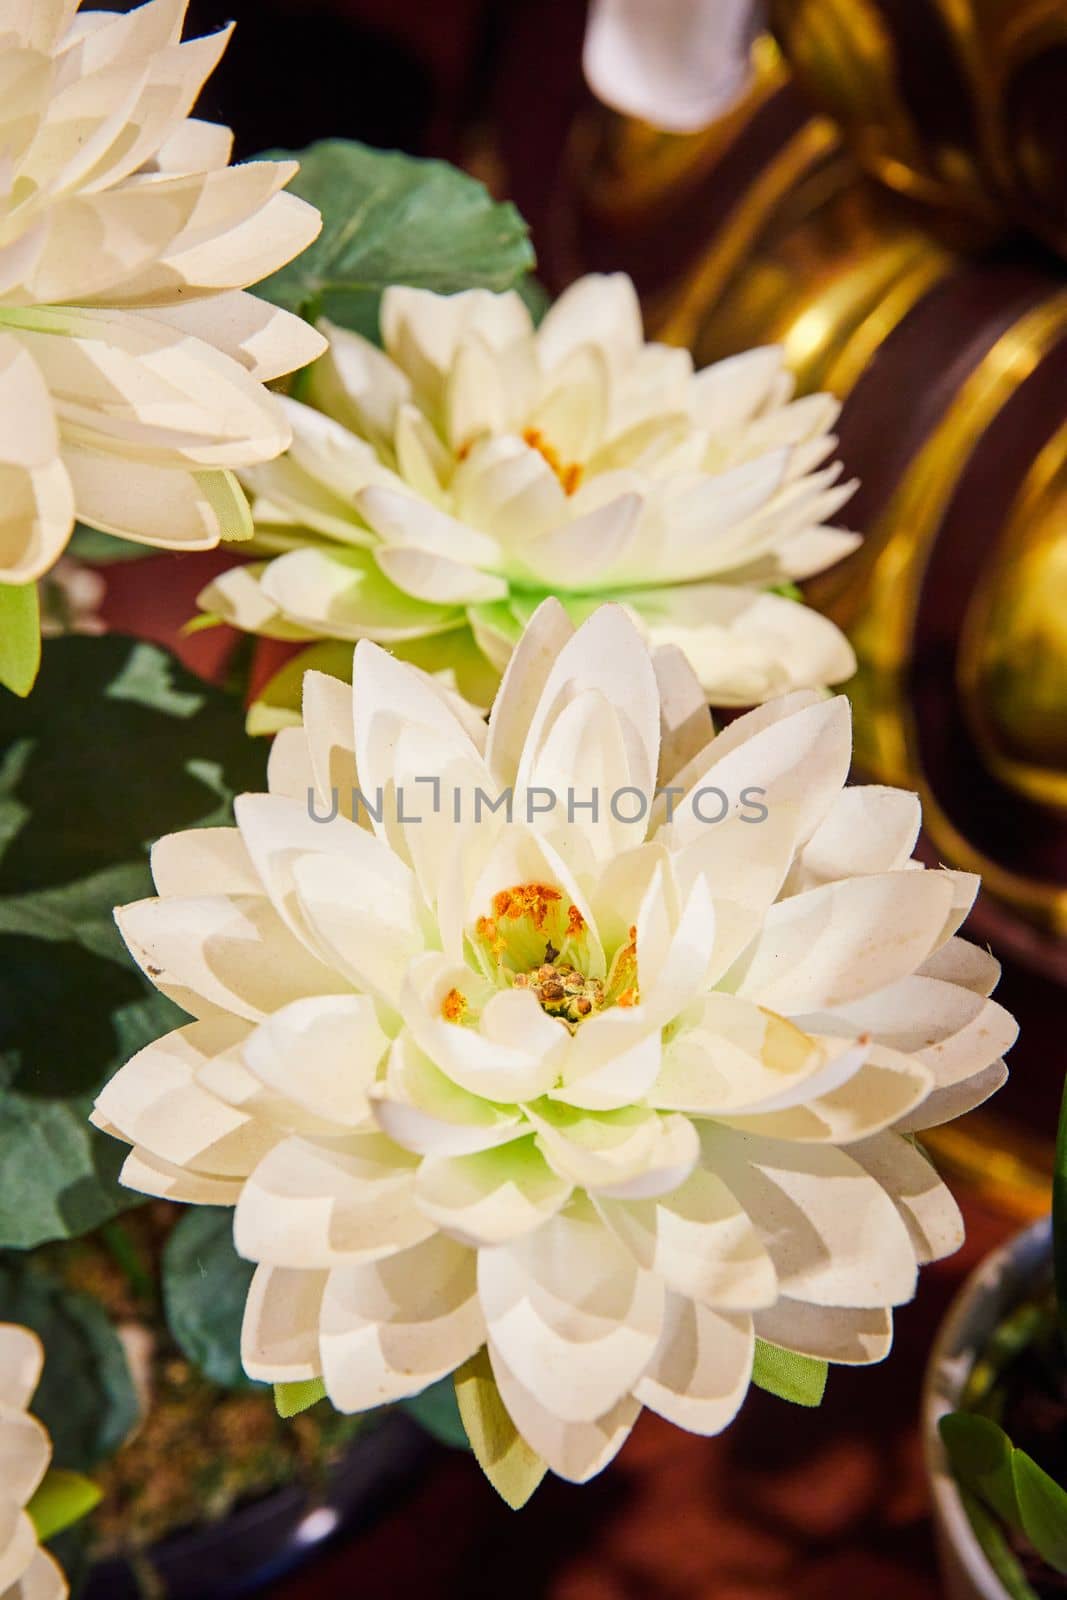 Detail of white lotus flowers around golden objects by njproductions